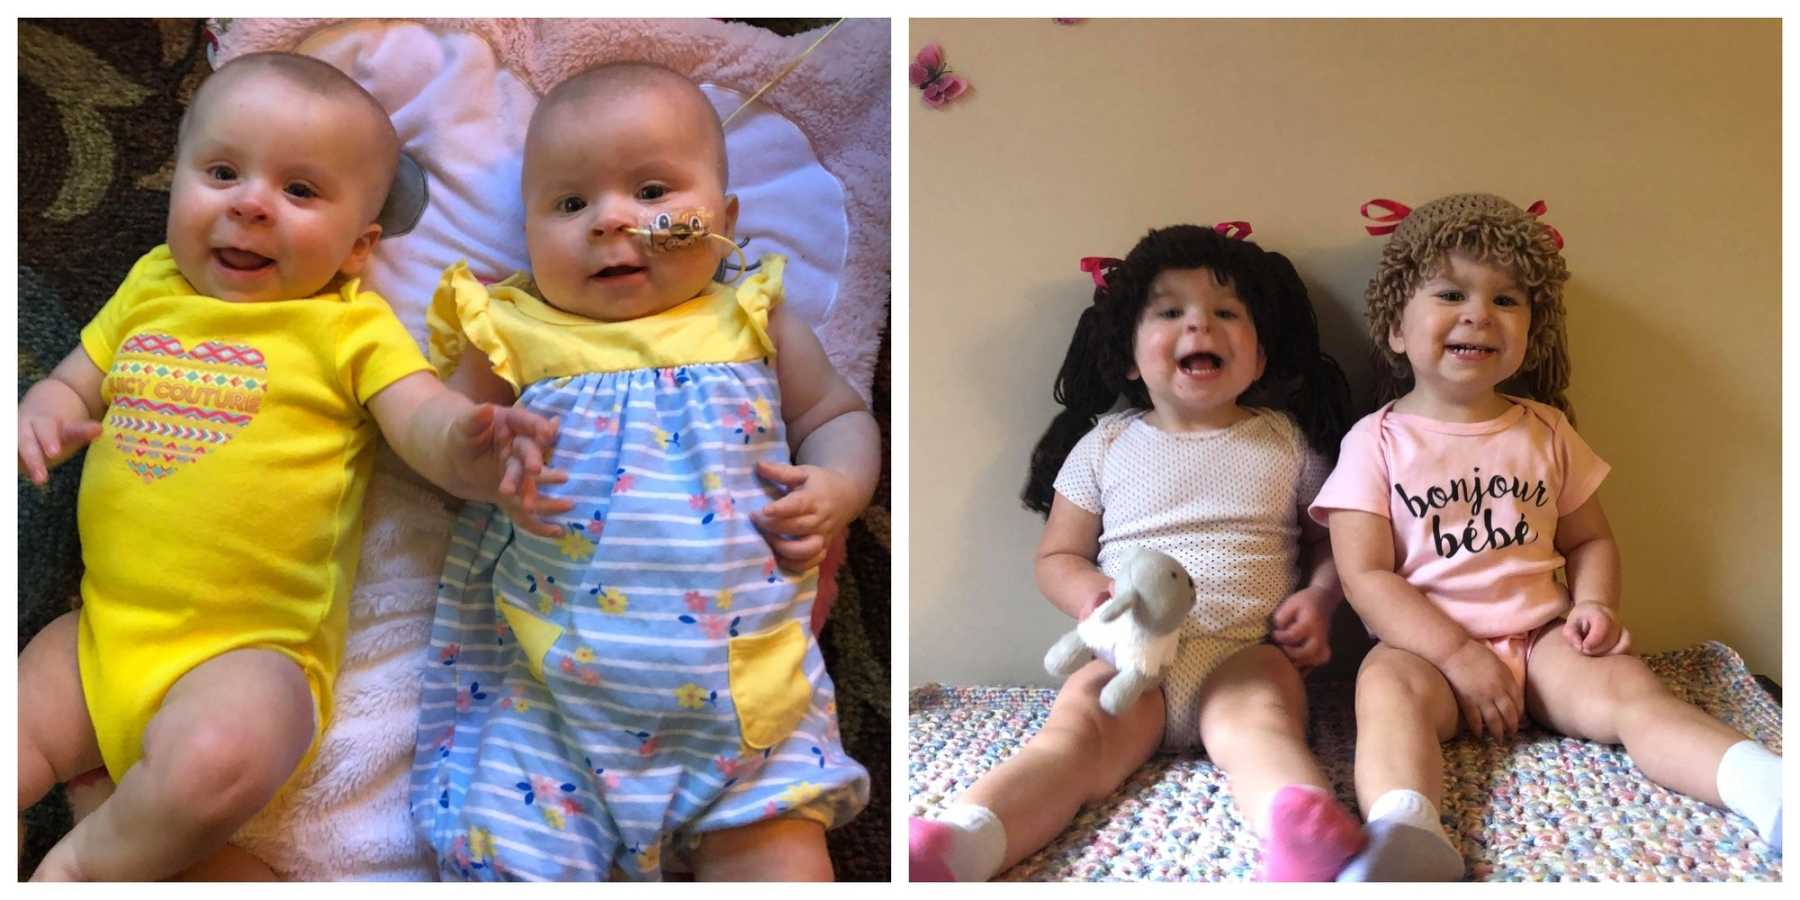 Family Devastated After Twins Are Diagnosed With Cancer 